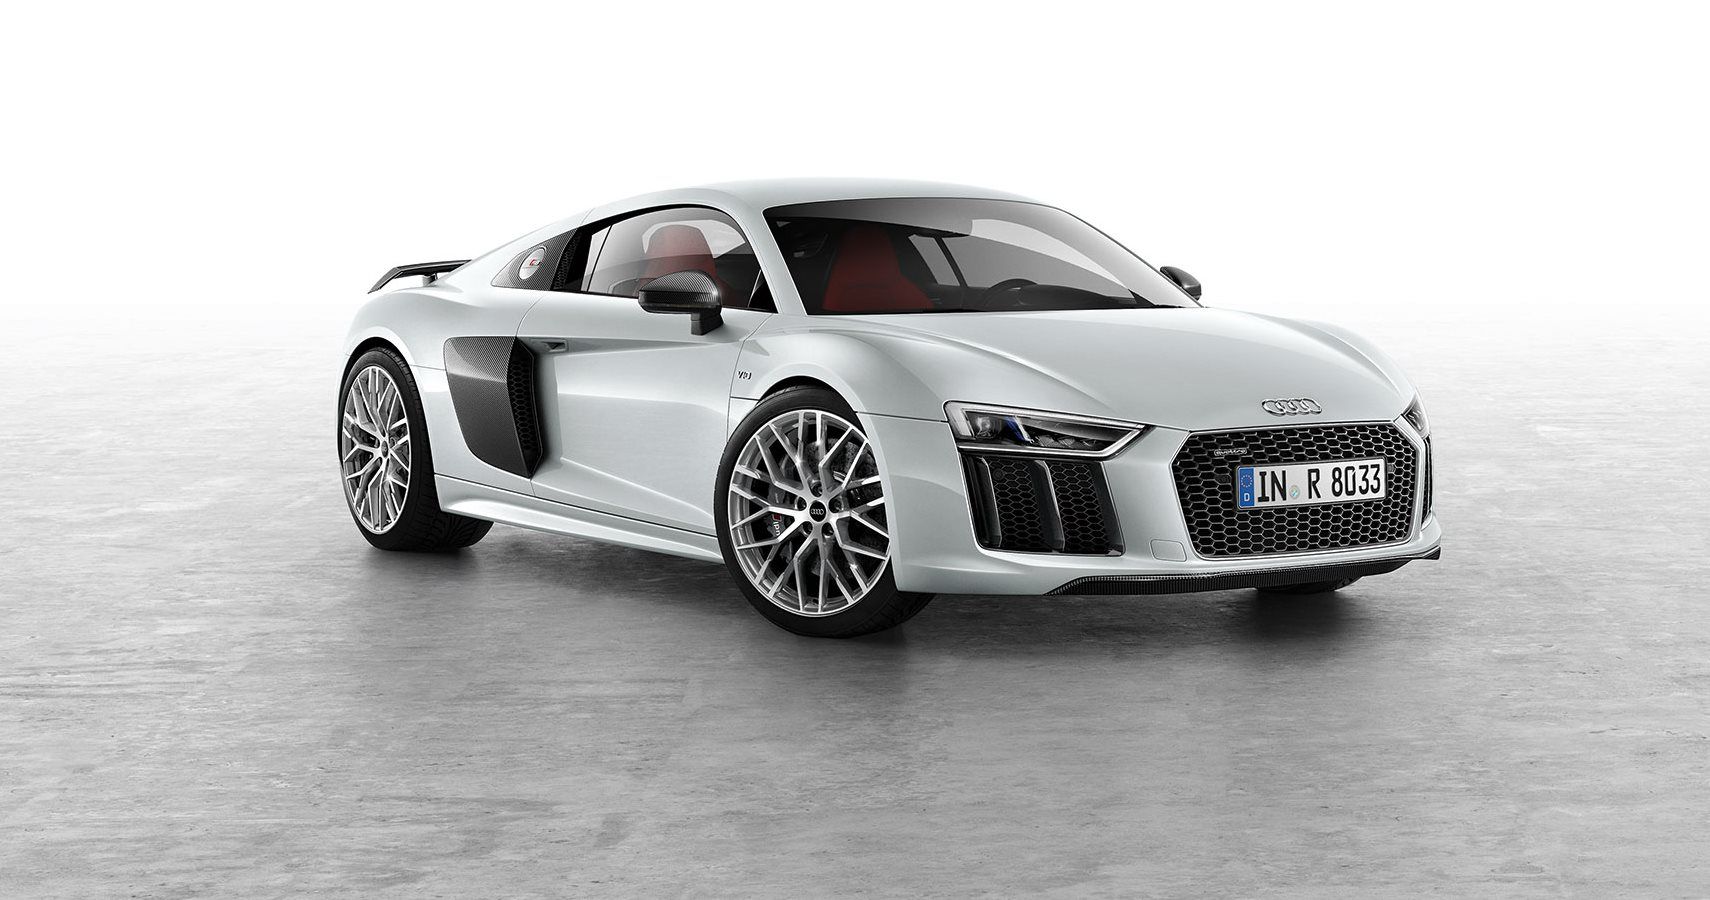 Rumor: Next Generation Audi R8 To Ditch V10 Engine For More Power